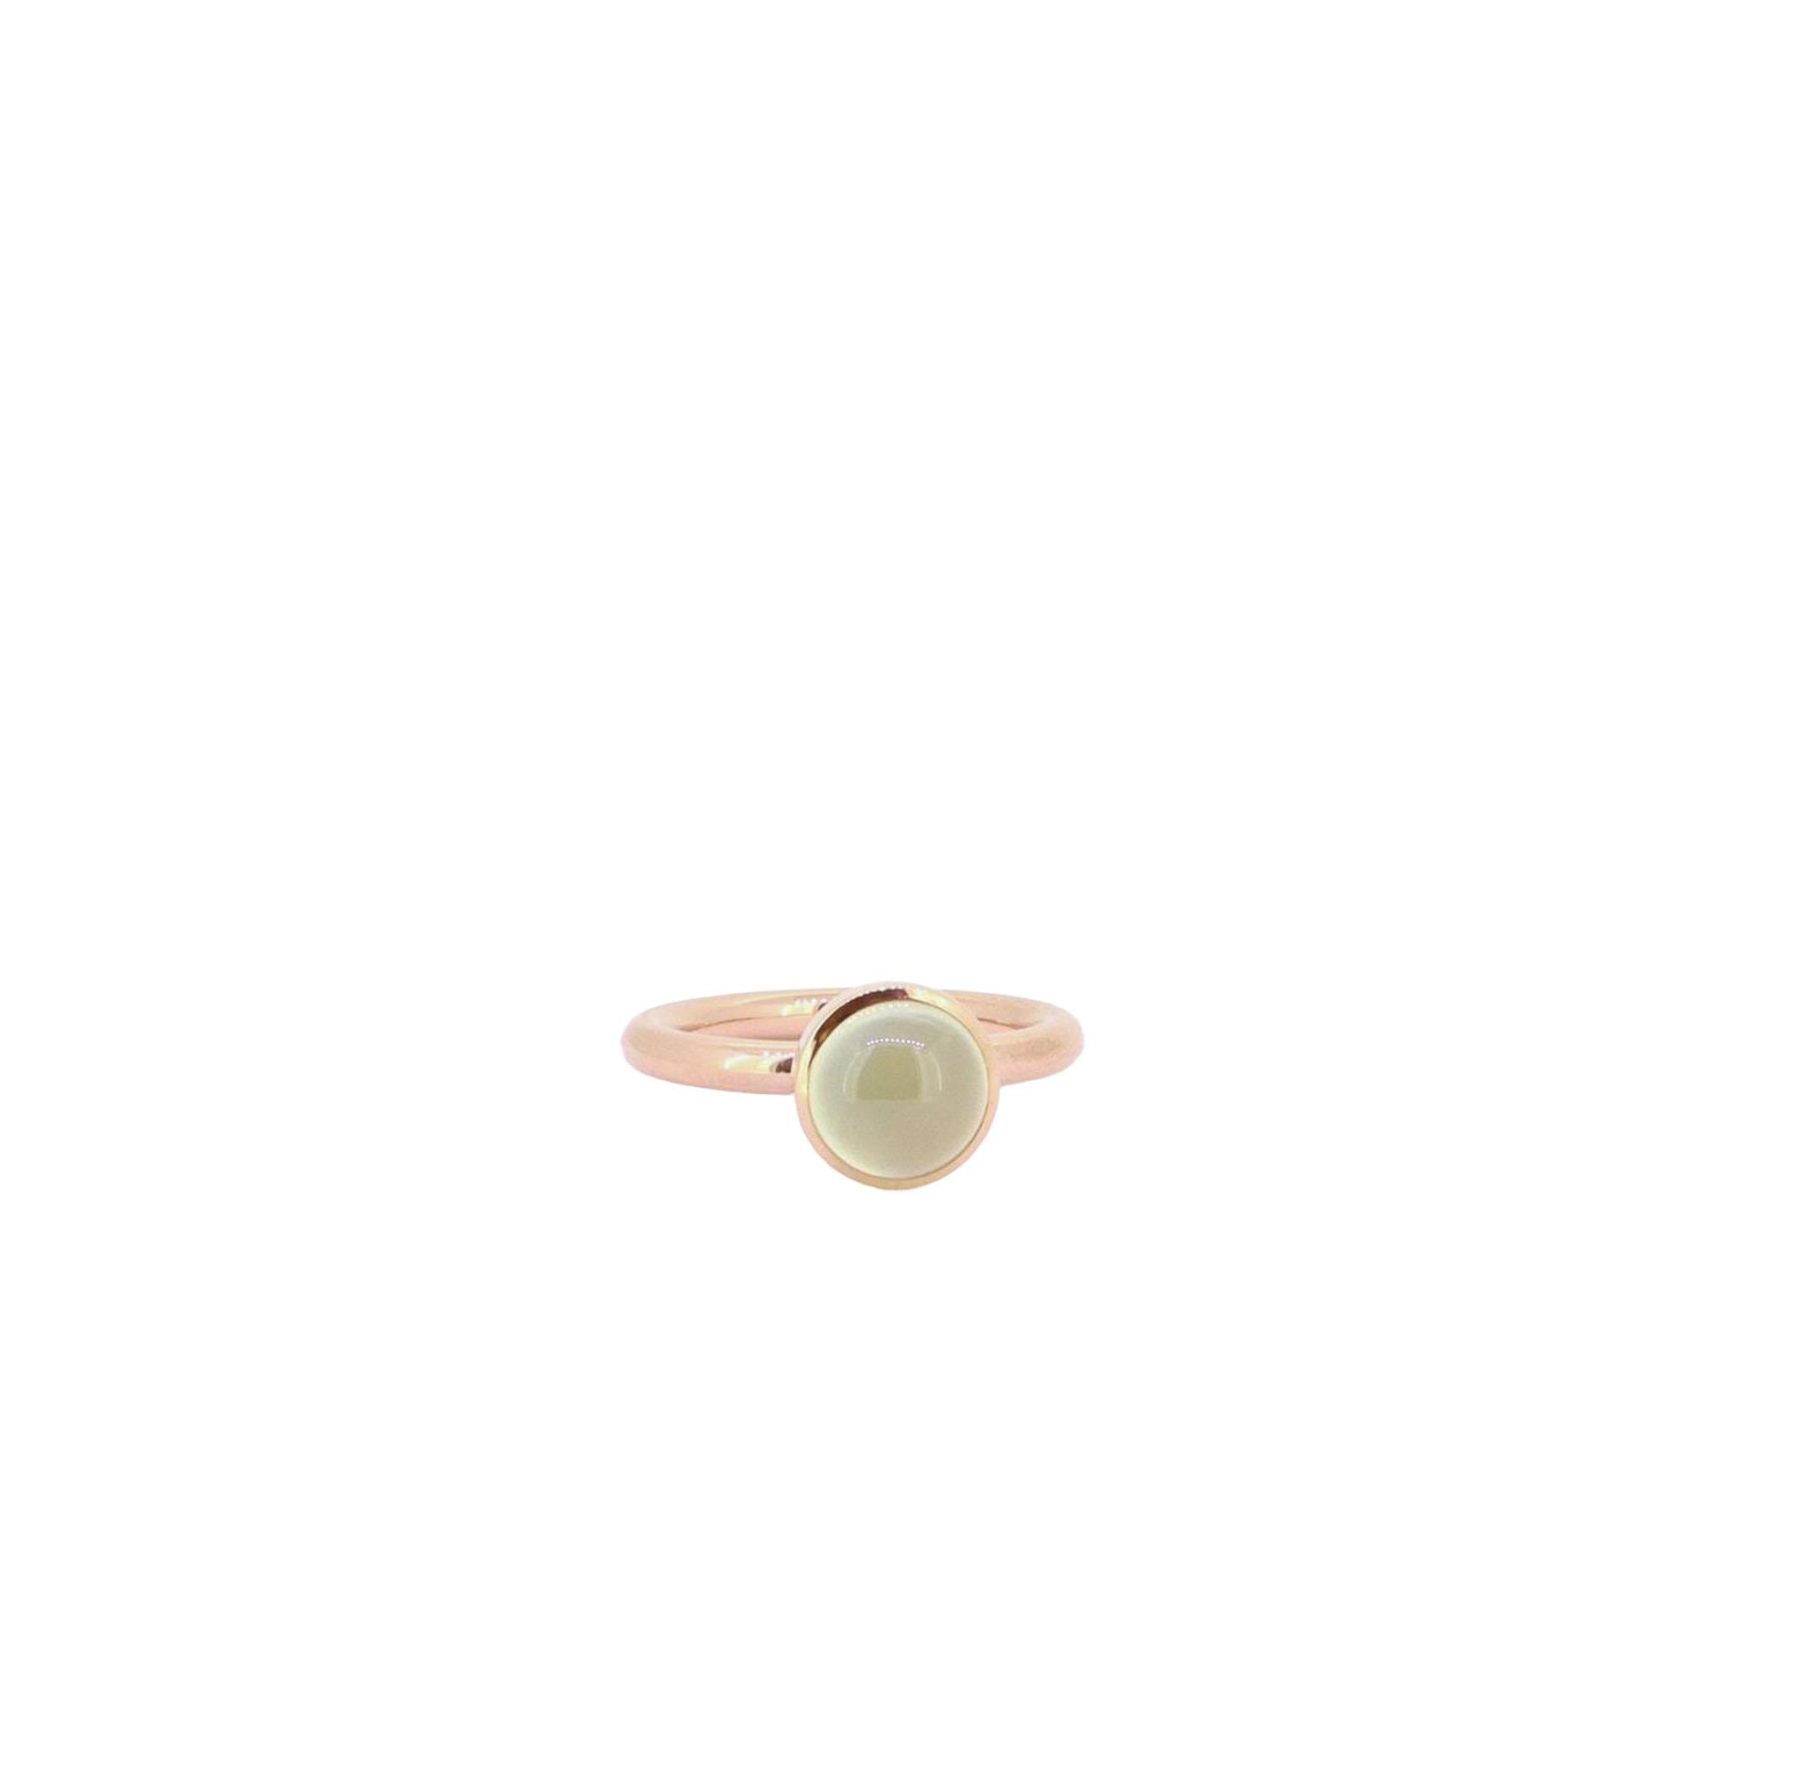 Ring Twiggy 8mm Prehnit Rotgold - Georg Spreng - 421spre09-5A